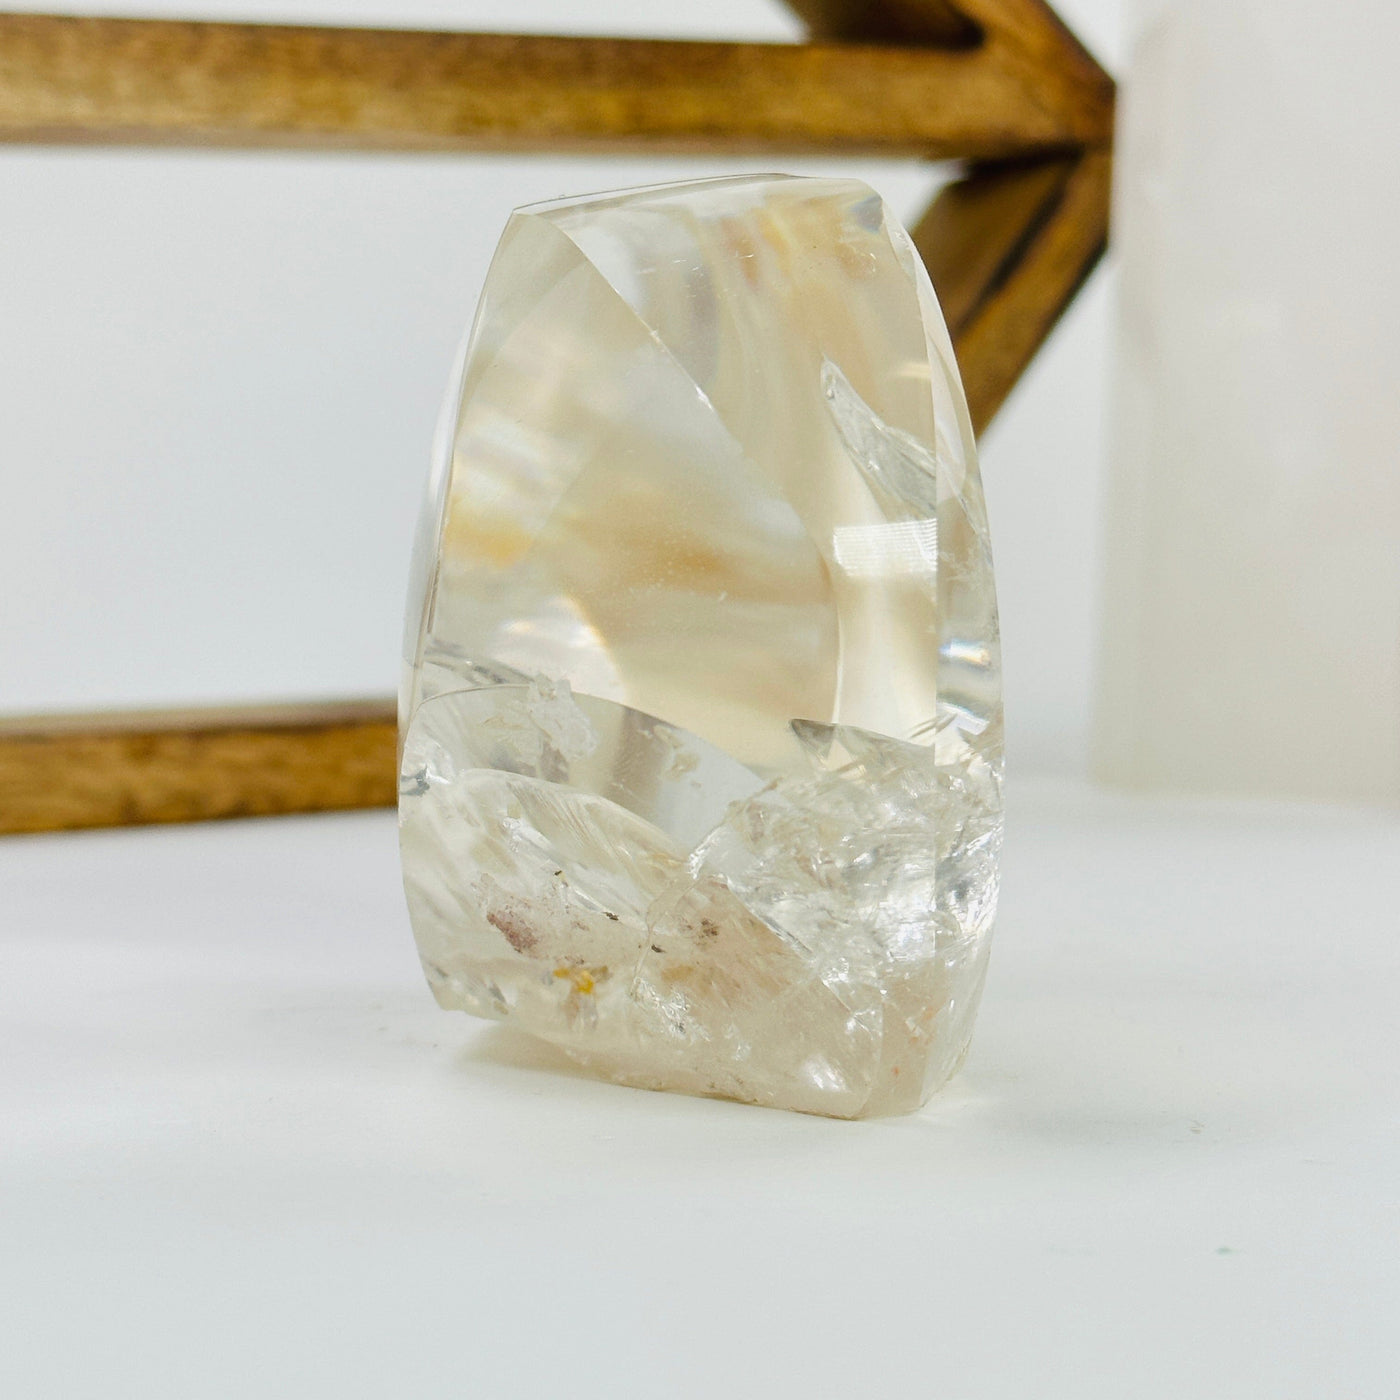 crystal quartz with inclusions with decorations in the background